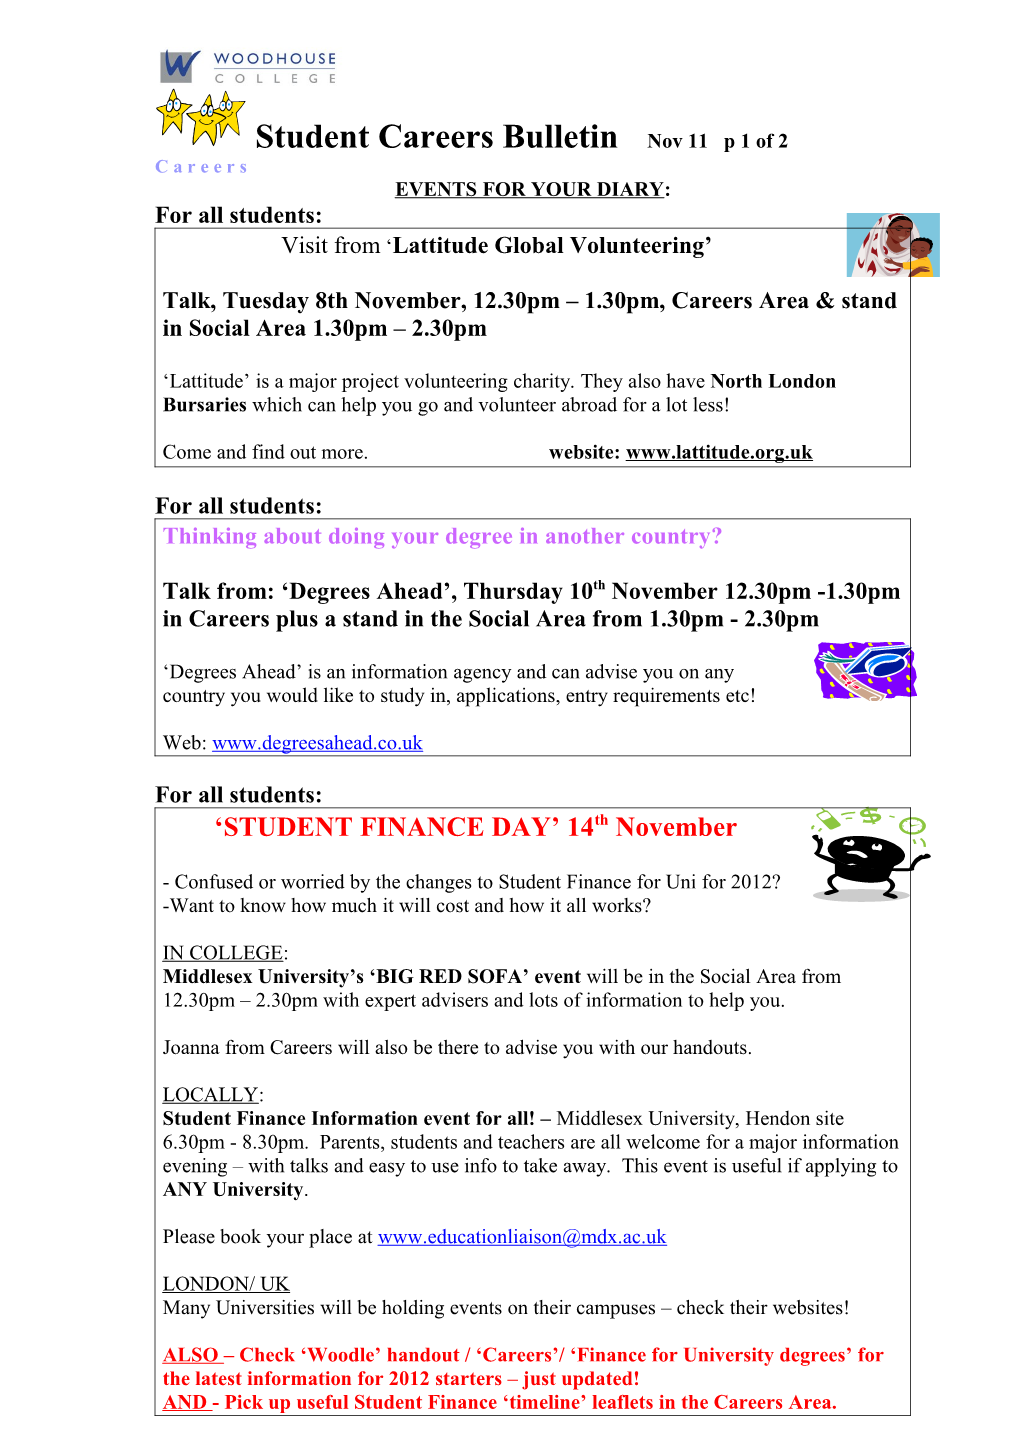 Events for Your Diary